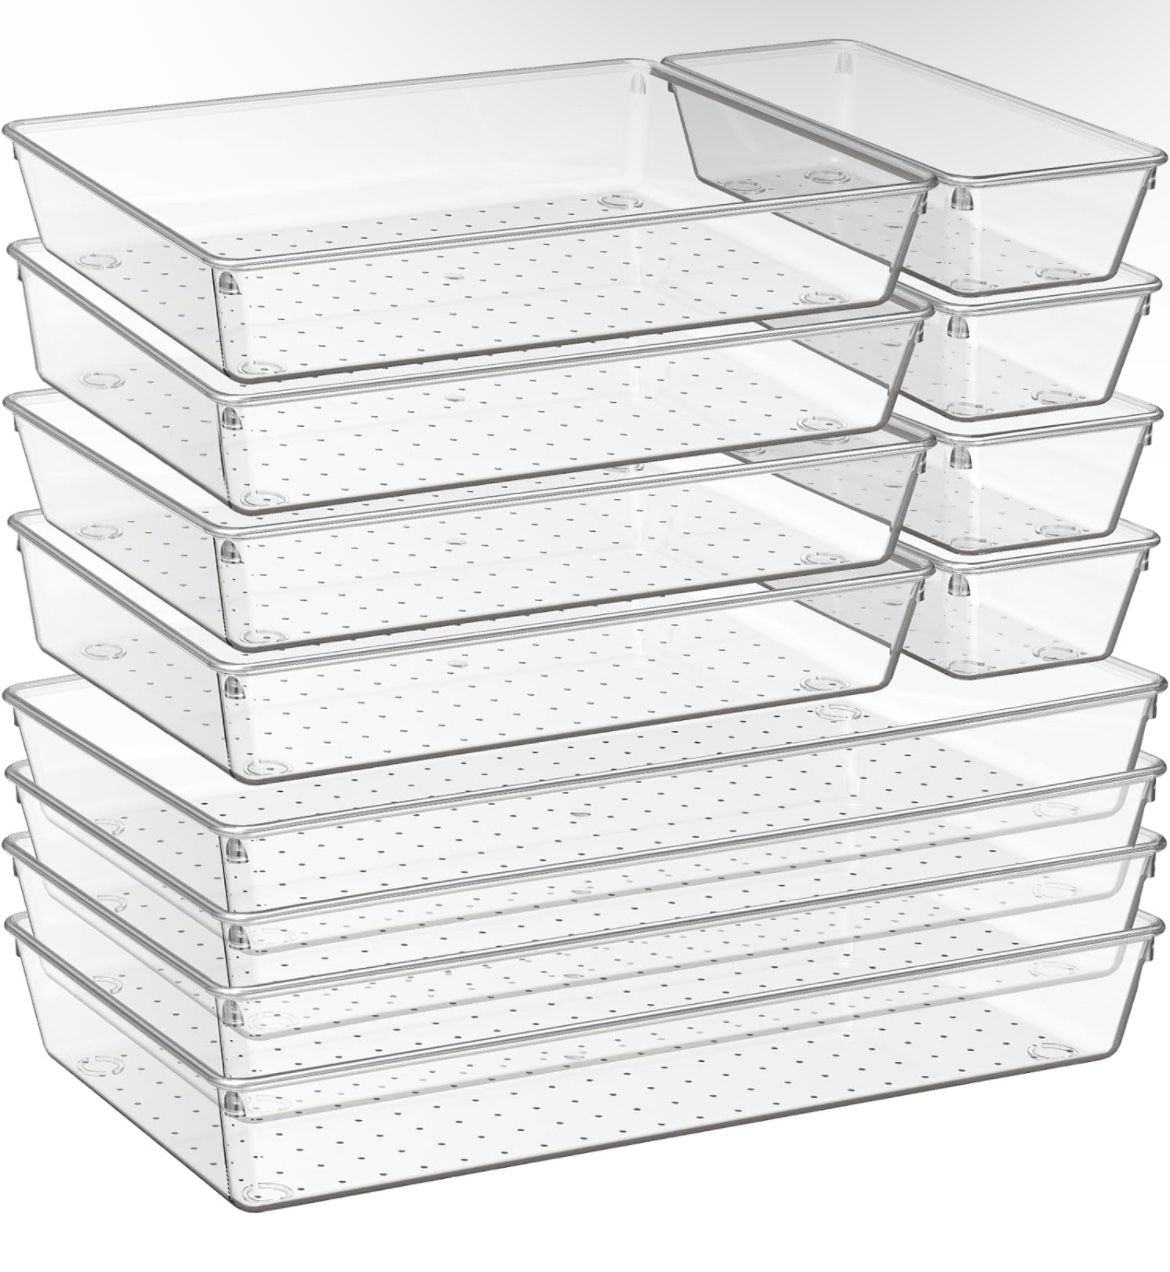 12 Pack Large Clear Plastic Drawer Organizer Trays | MULTI-USE Acrylic Drawer Storage for Kitchen, Bathroom, Makeup, Office, School, Undies | College 